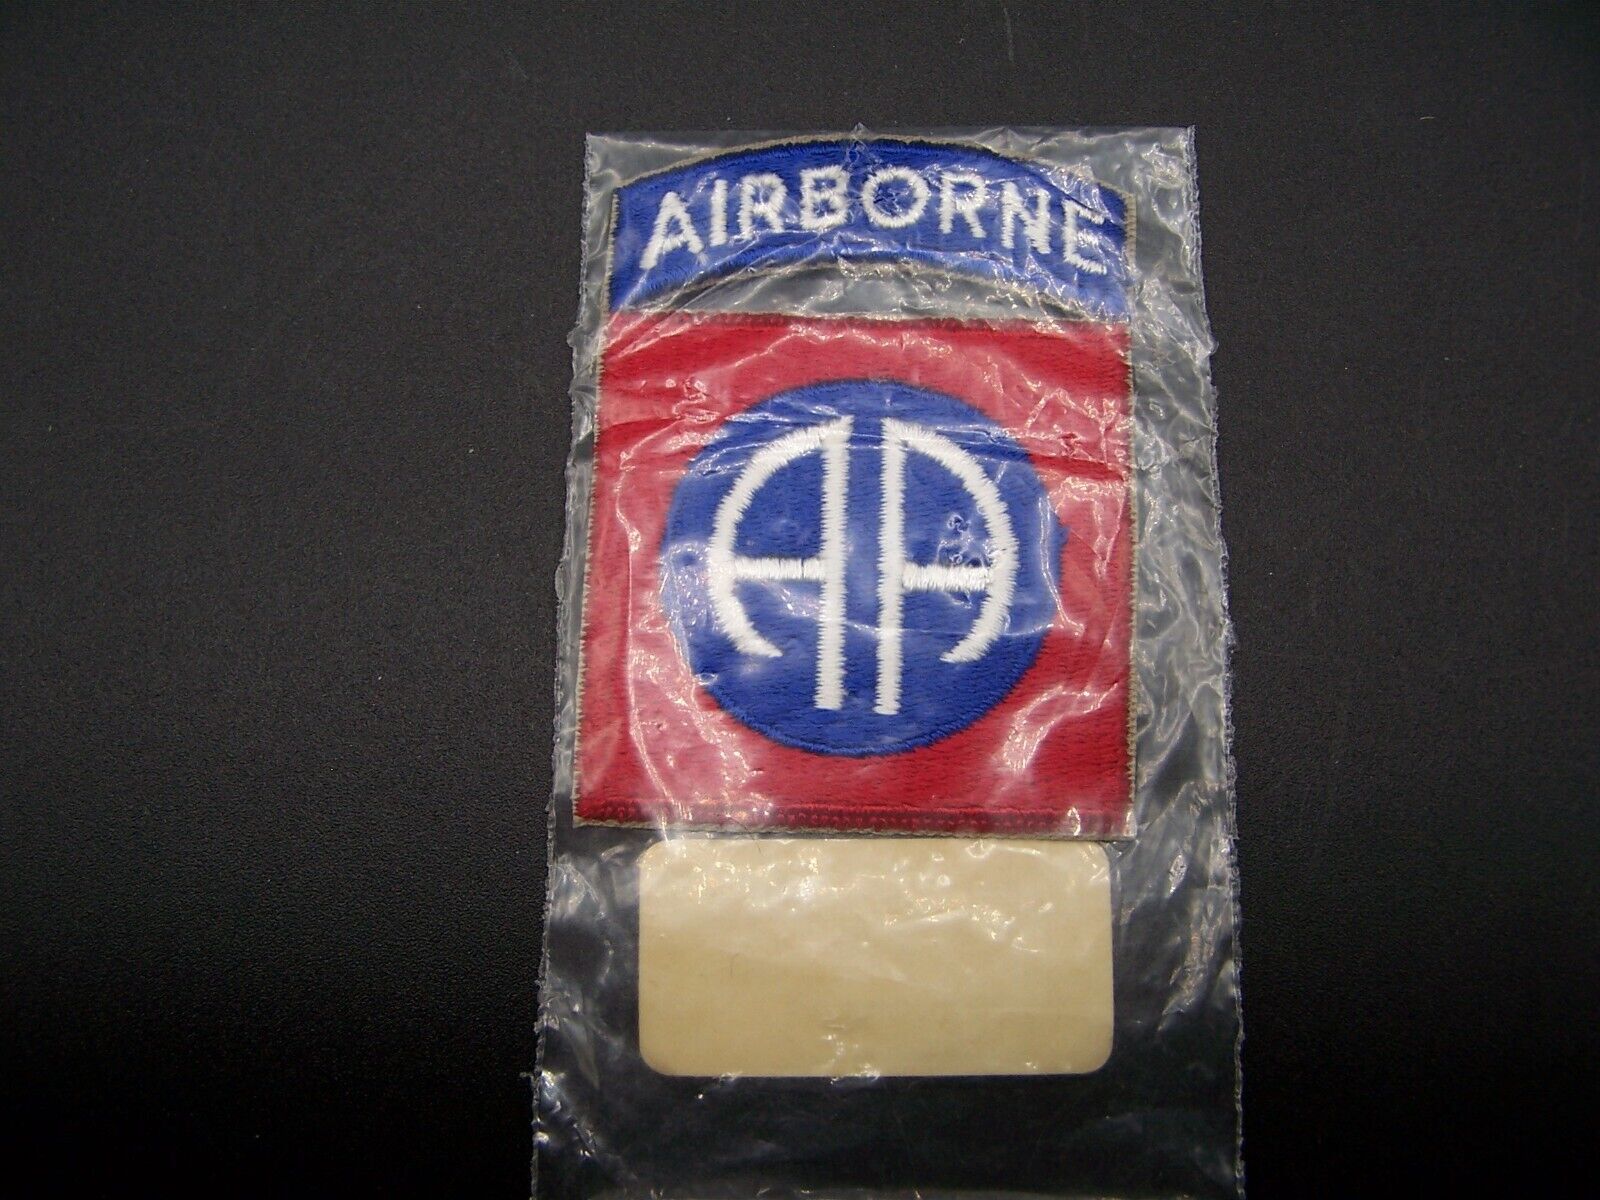 VINTAGE NEW OLD STOCK 82 ND AIRBORNE DIVISION COLORED PATCH WITH TAB IN PACKAGE